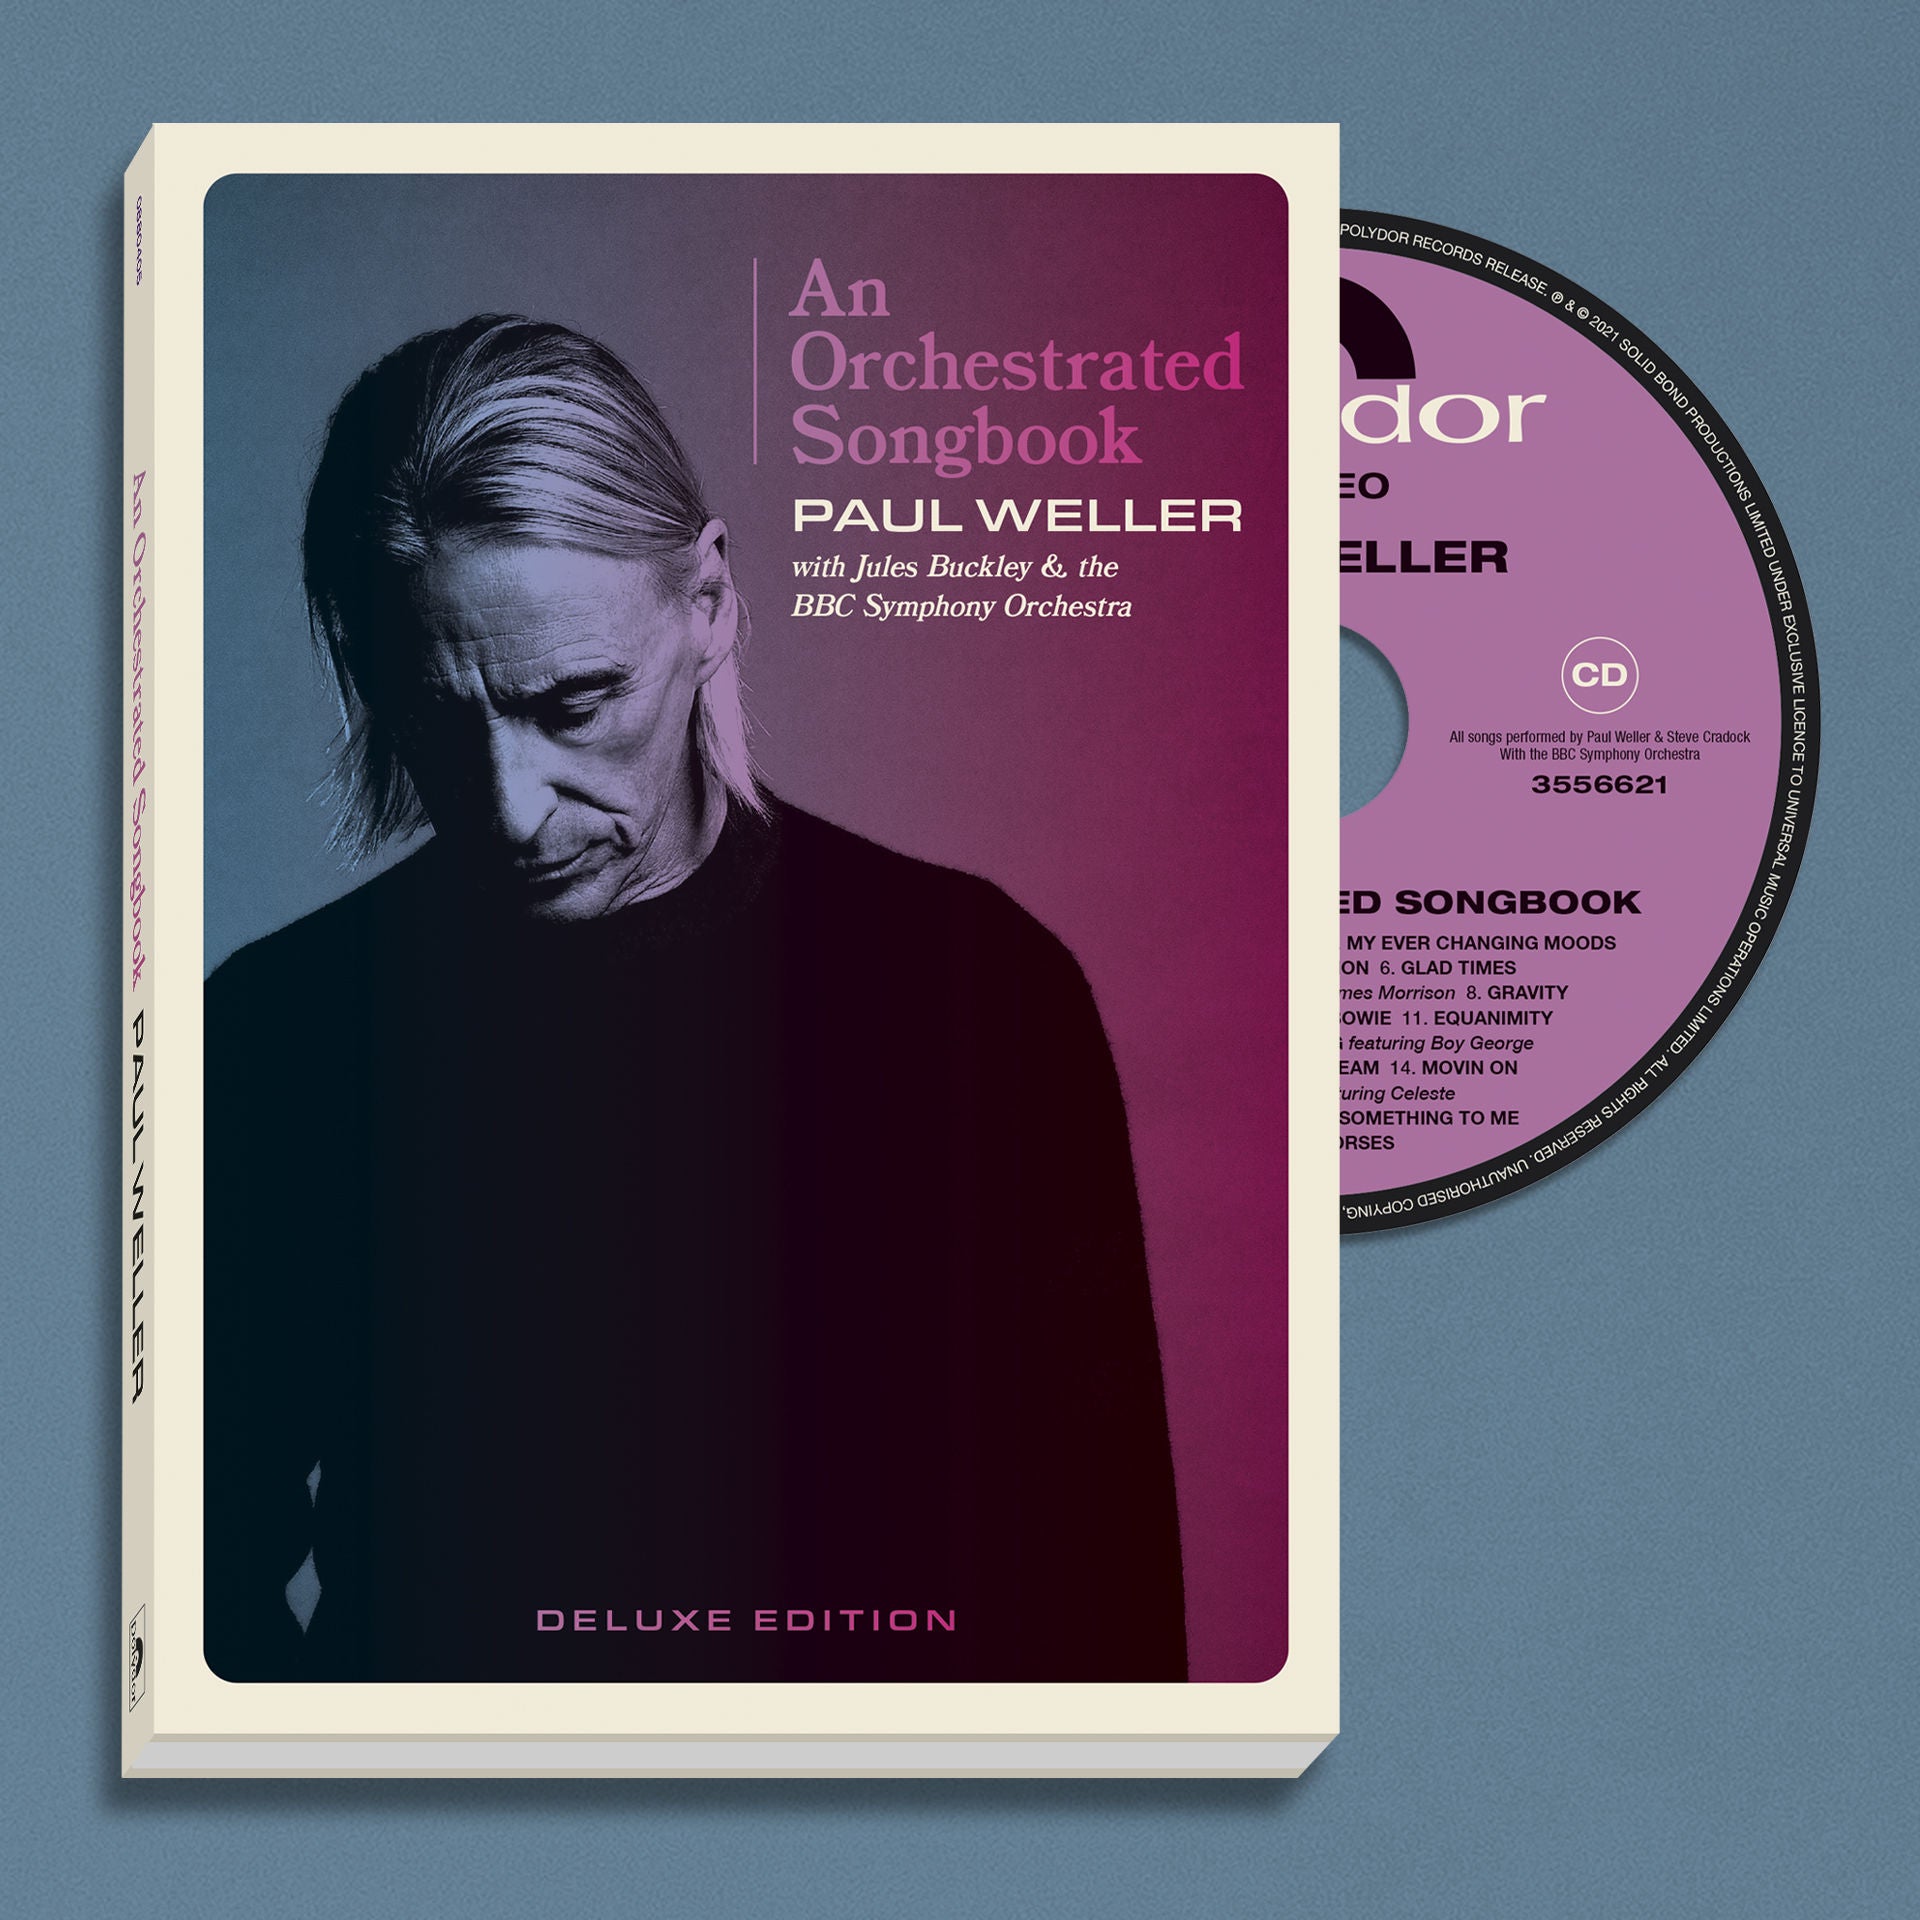 Paul Weller - An Orchestrated Songbook Deluxe